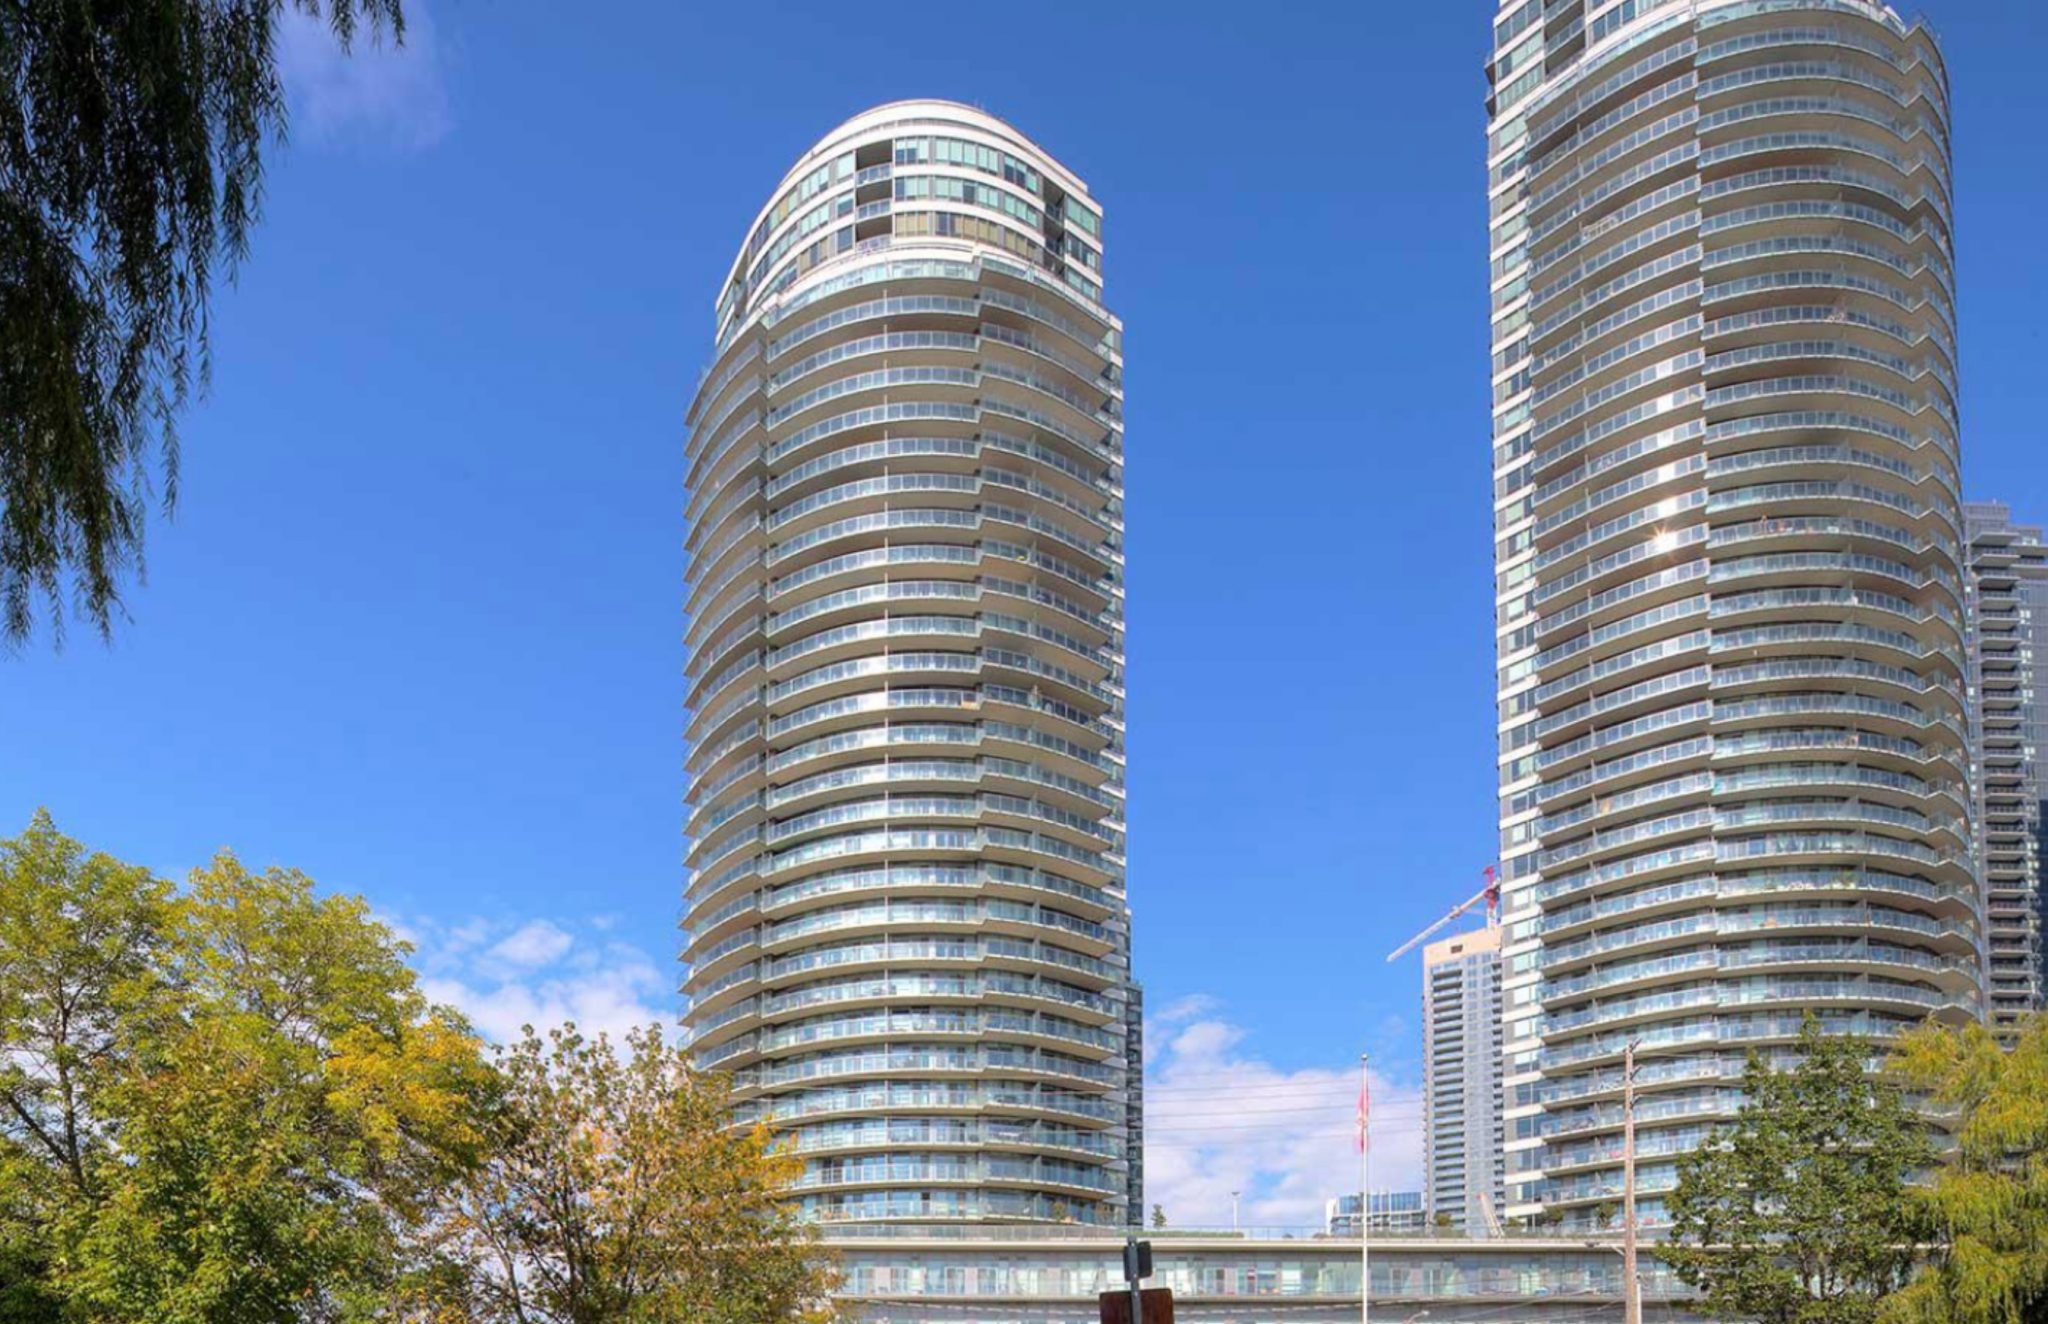 Condo Management Best Practices. Beyond The Sea-South Tower. Etobicoke. Toronto. Duka PM